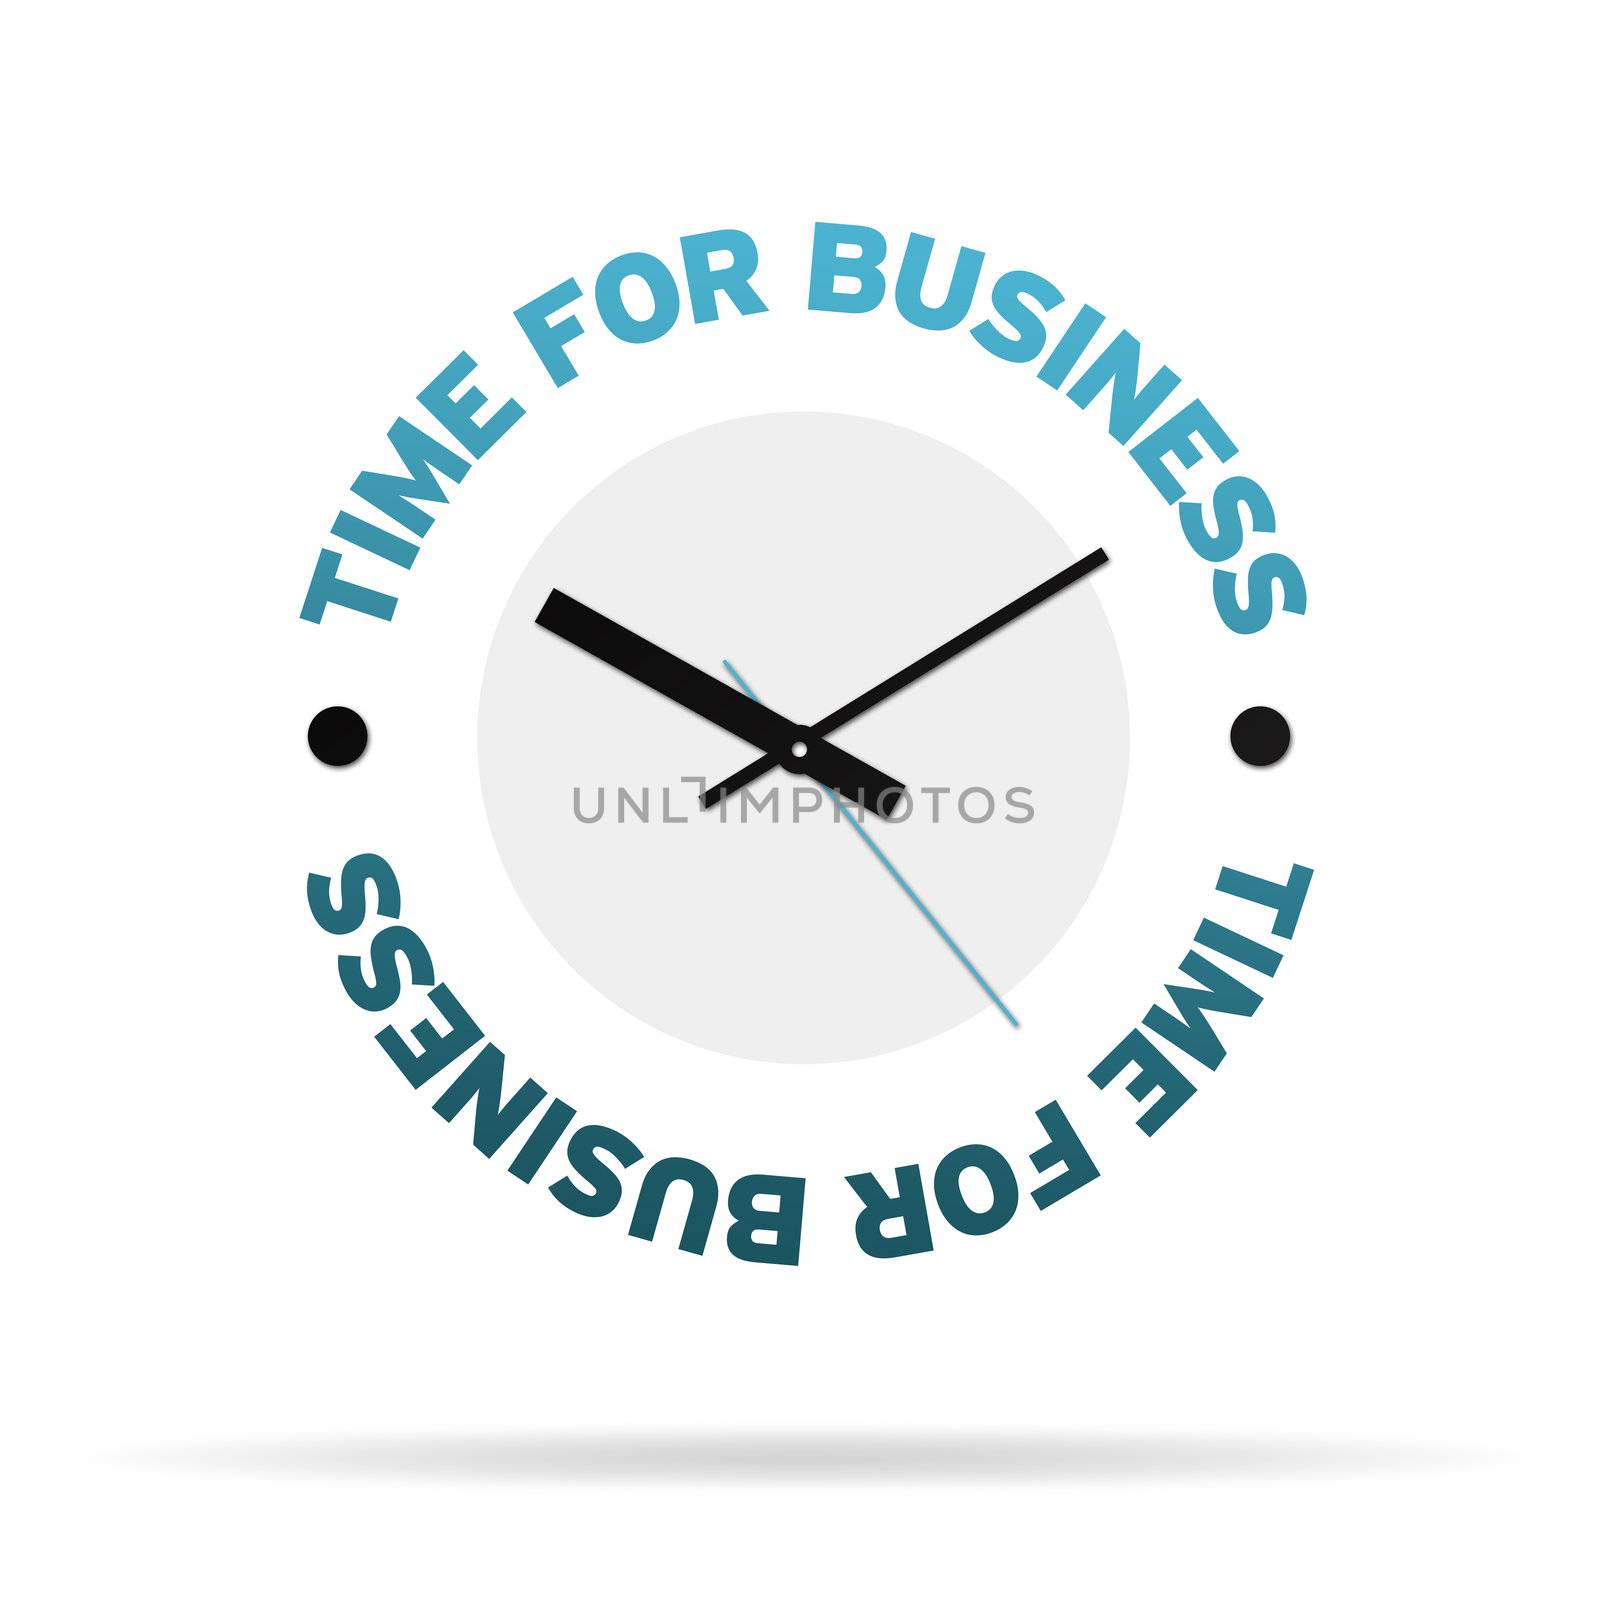 Clock with the words time for business on white background.